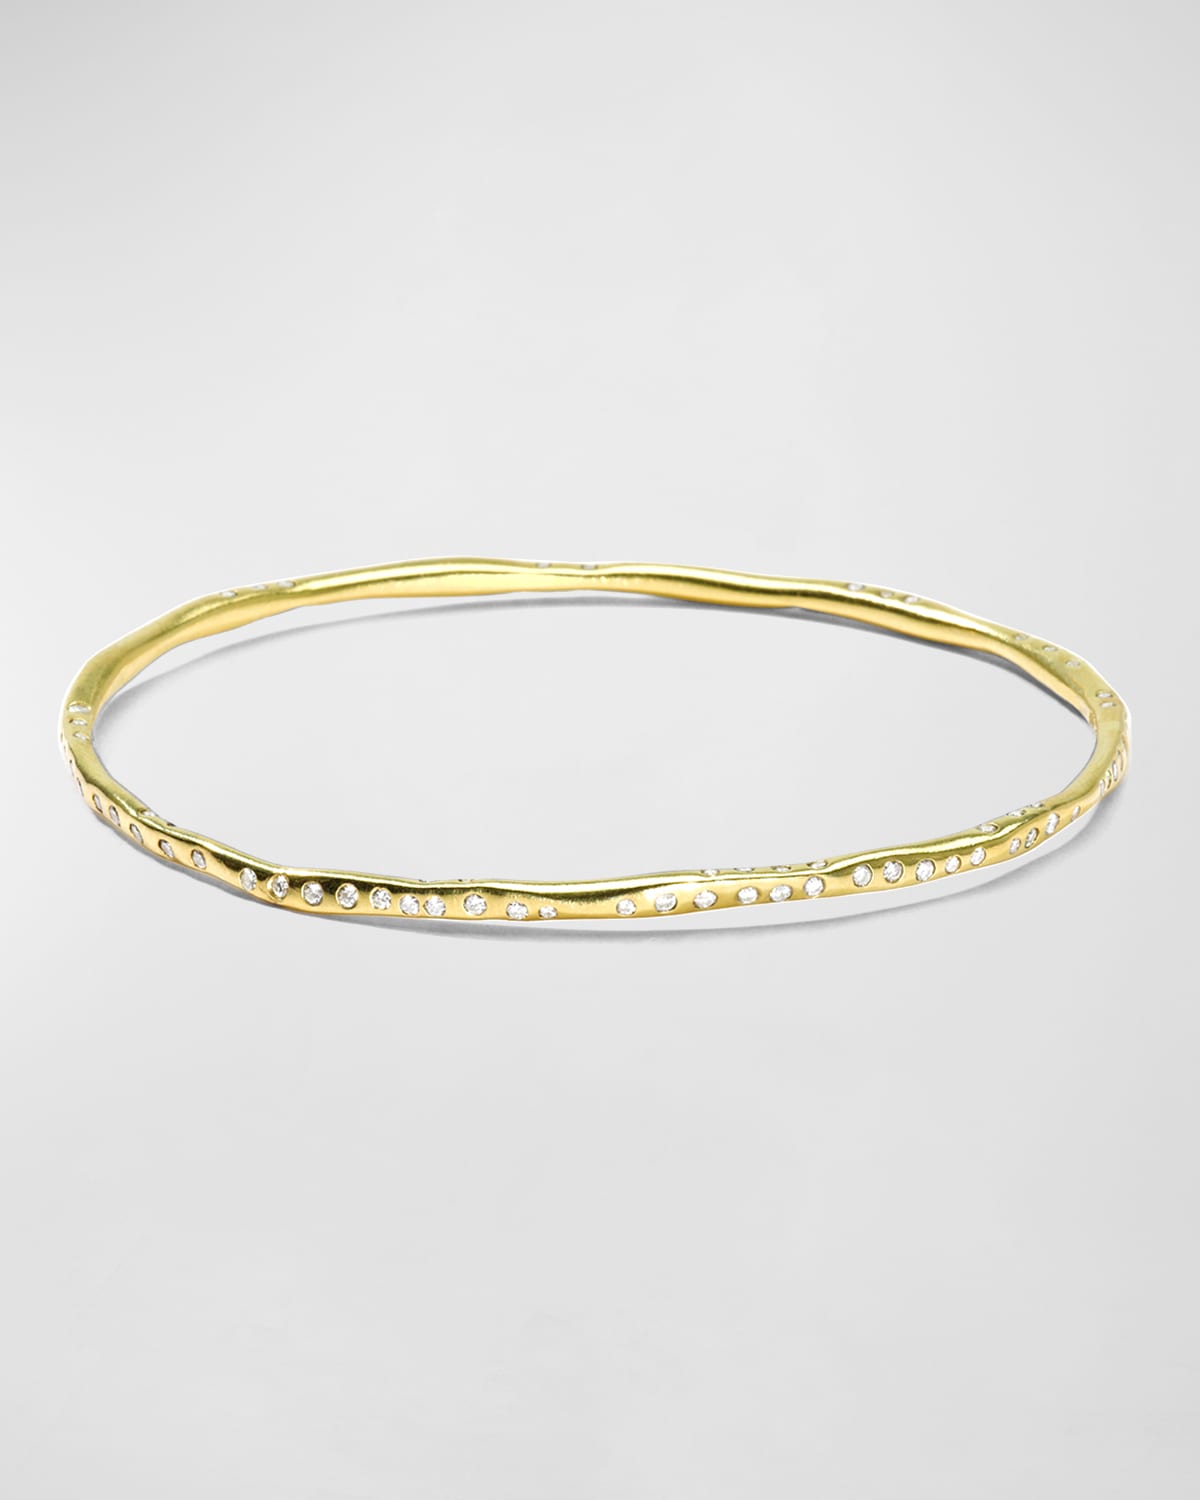 Ottoline Rose Gold Narrow Cuff with Gypsy-Set Baguette Diamonds